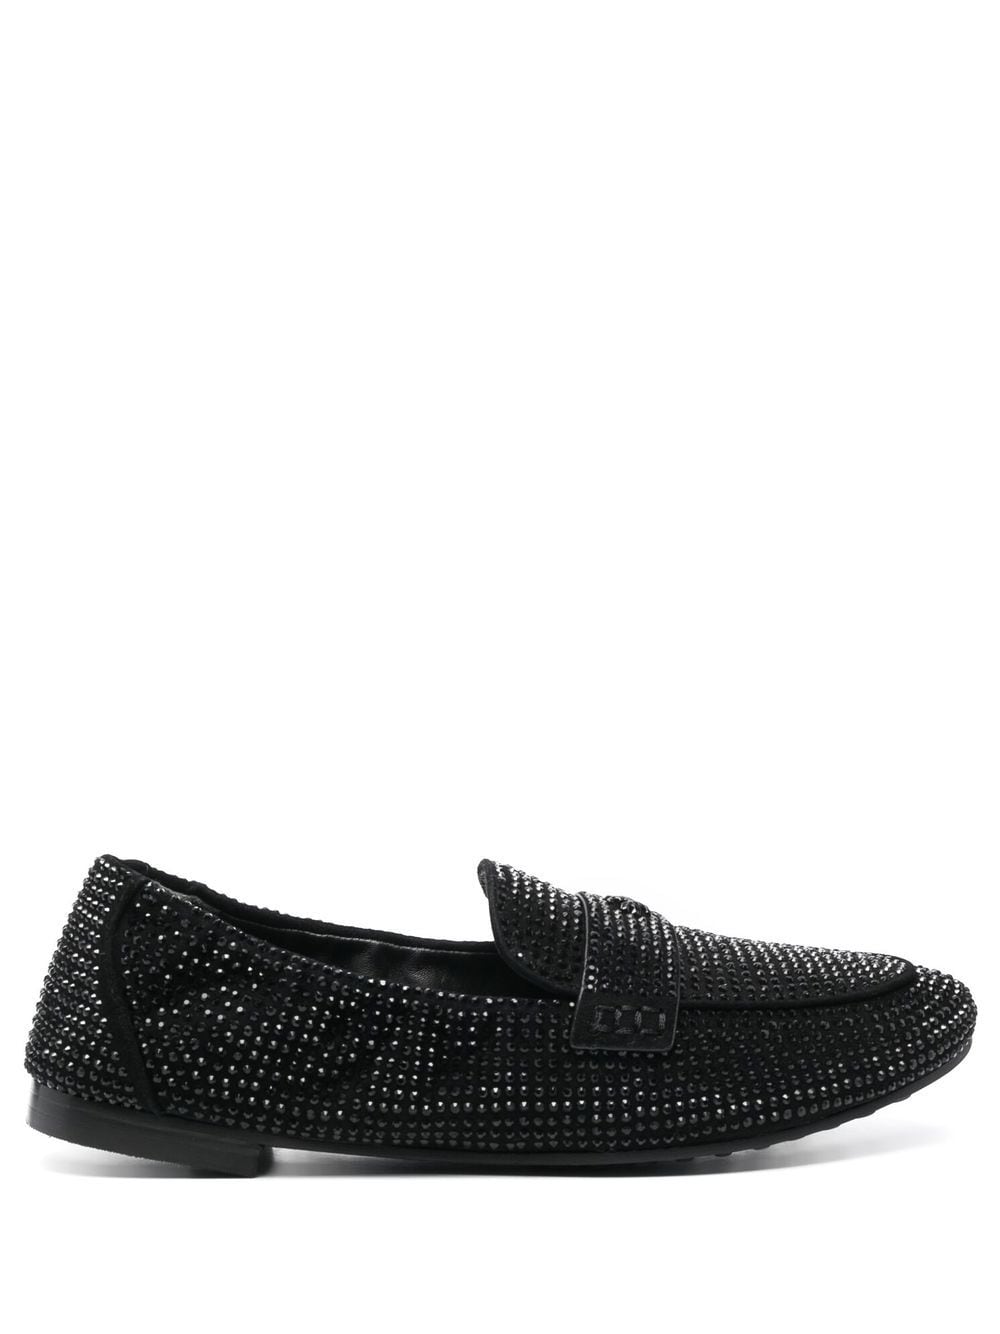 Tory Burch Crystal Embellished Loafers In Perfect Black | ModeSens